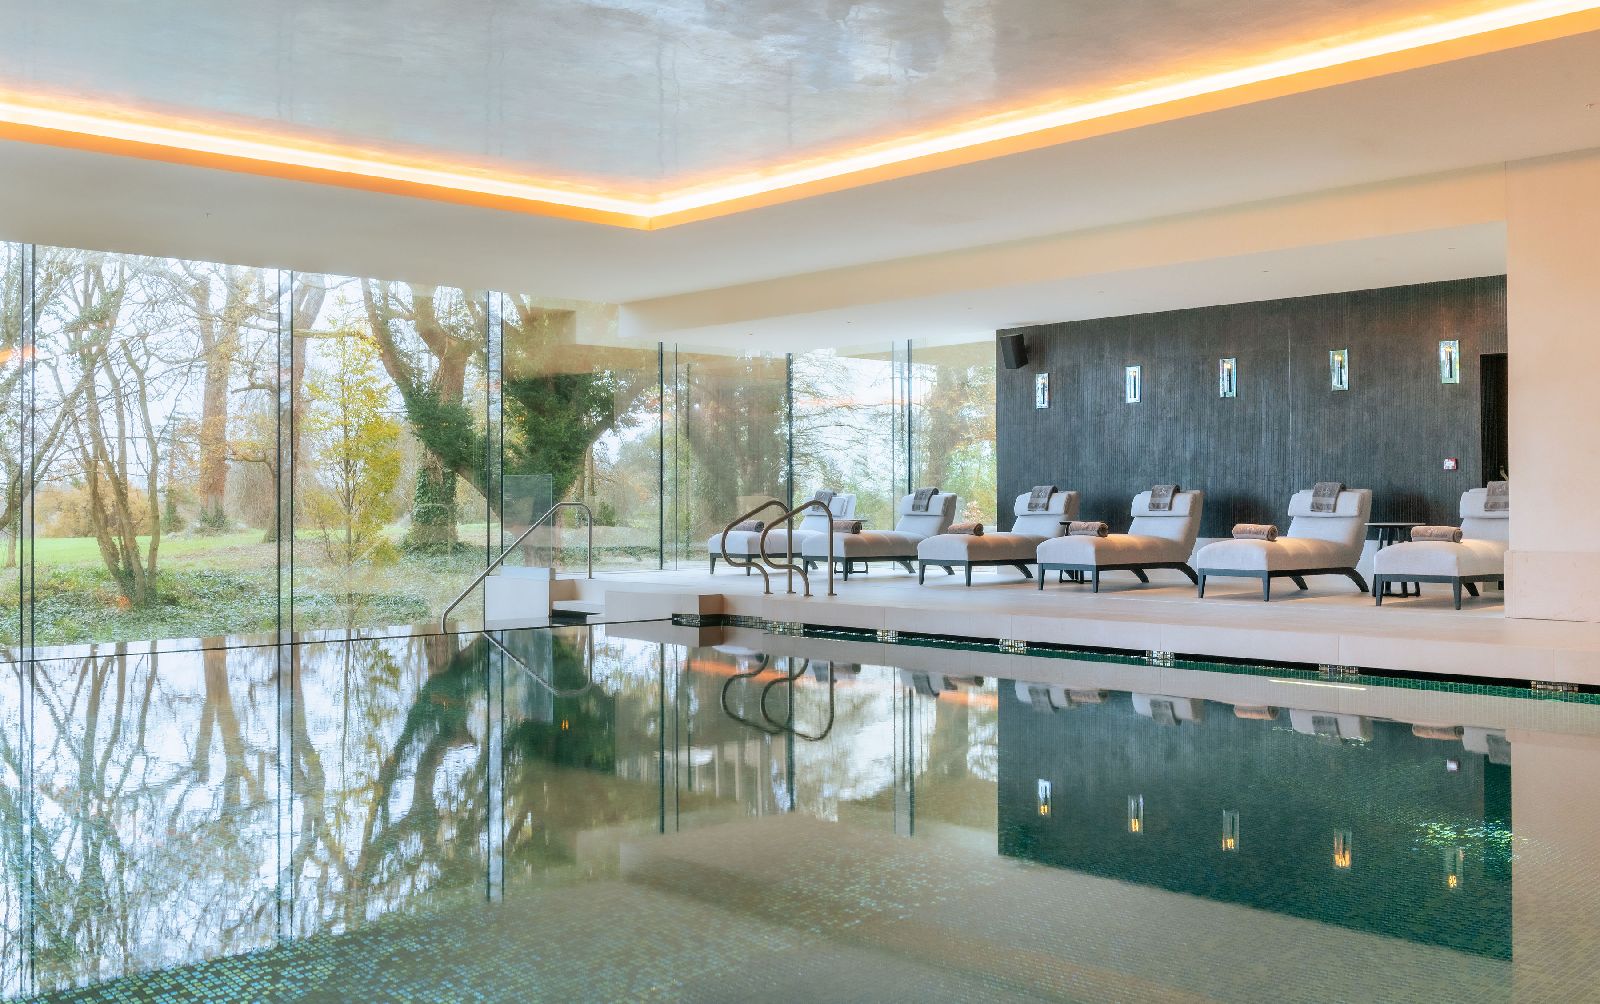 The indoor swimming pool at Adare Manor near Limerick in Ireland